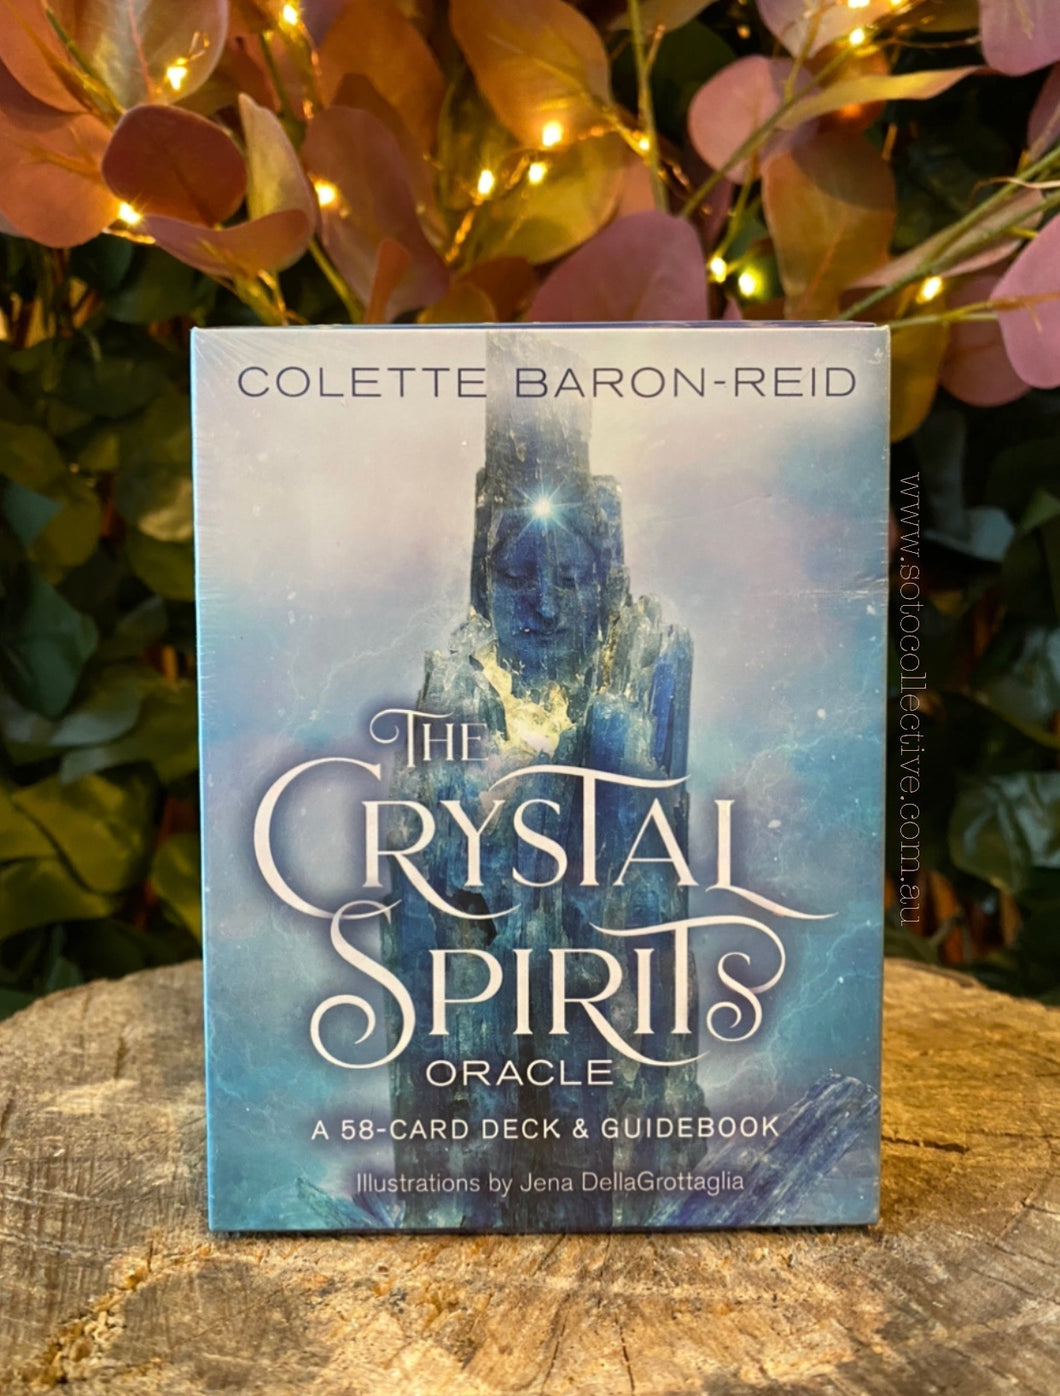 The Crystal Spirits - Oracle cards